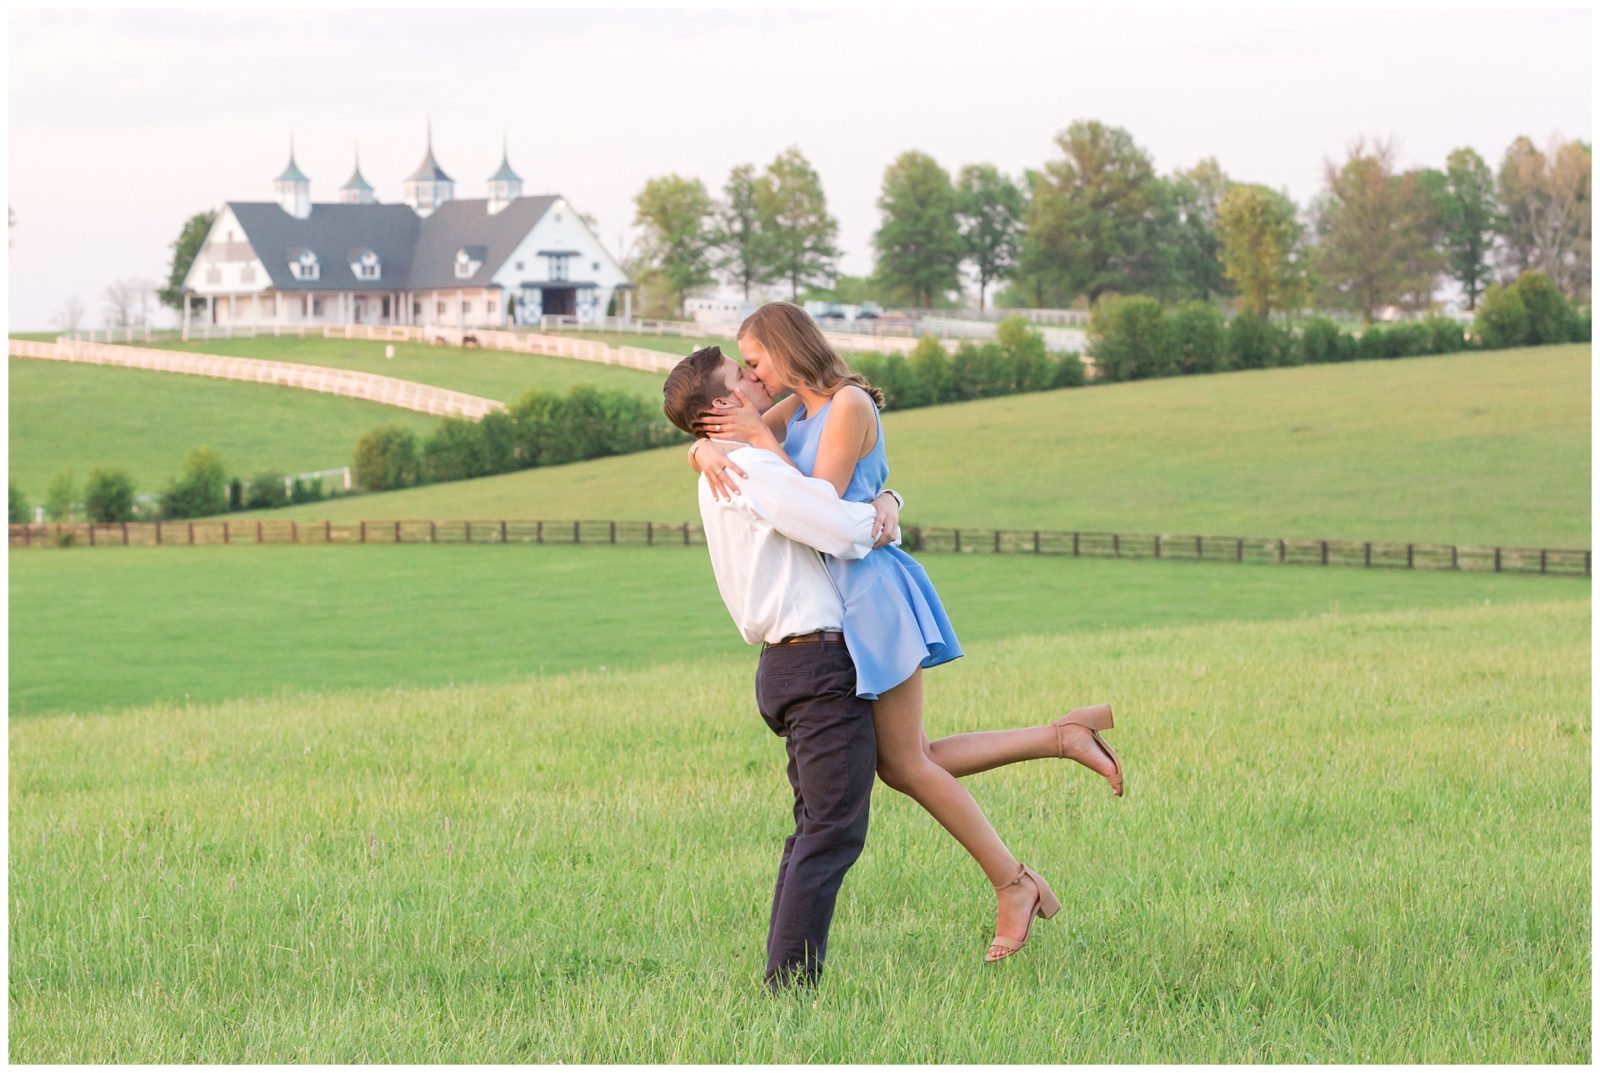 May Engagement Session with Manchester Farm in the background at Keeneland Racecourse in Lexington, KY